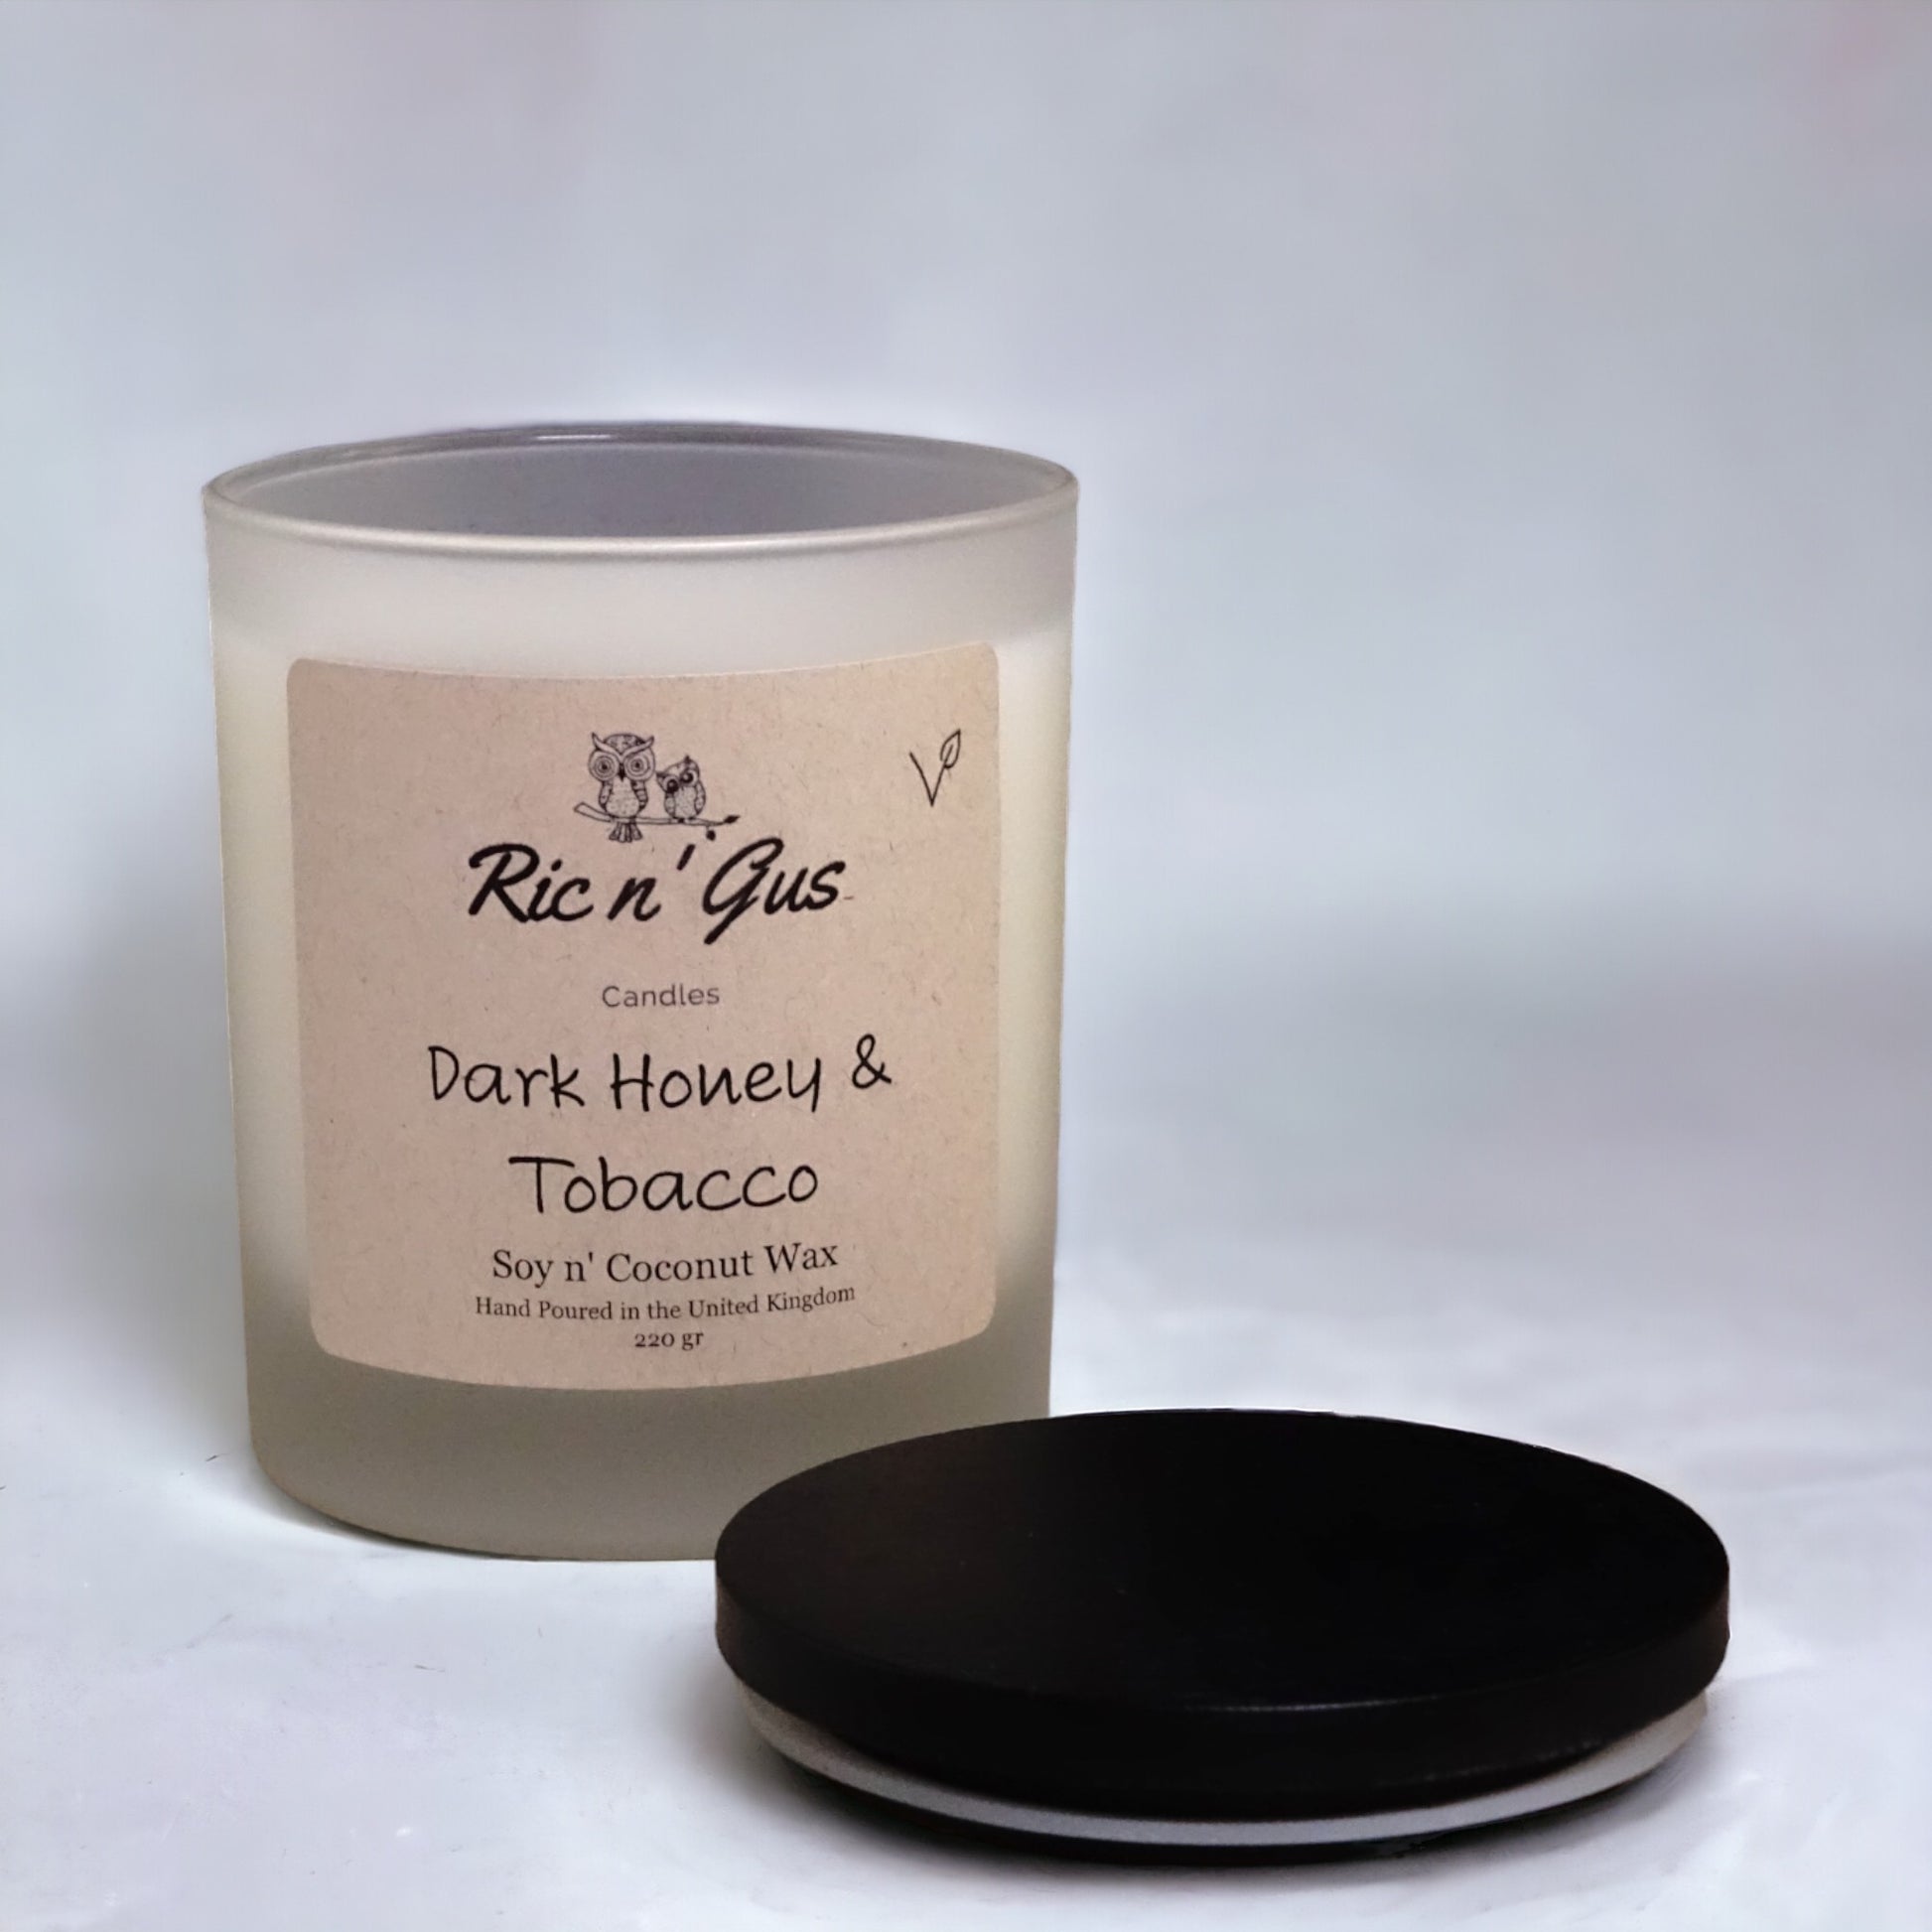 luxury Dark Honey & Tobacco Scented Candle - Soy & Coconut Wax ric n'gus candles